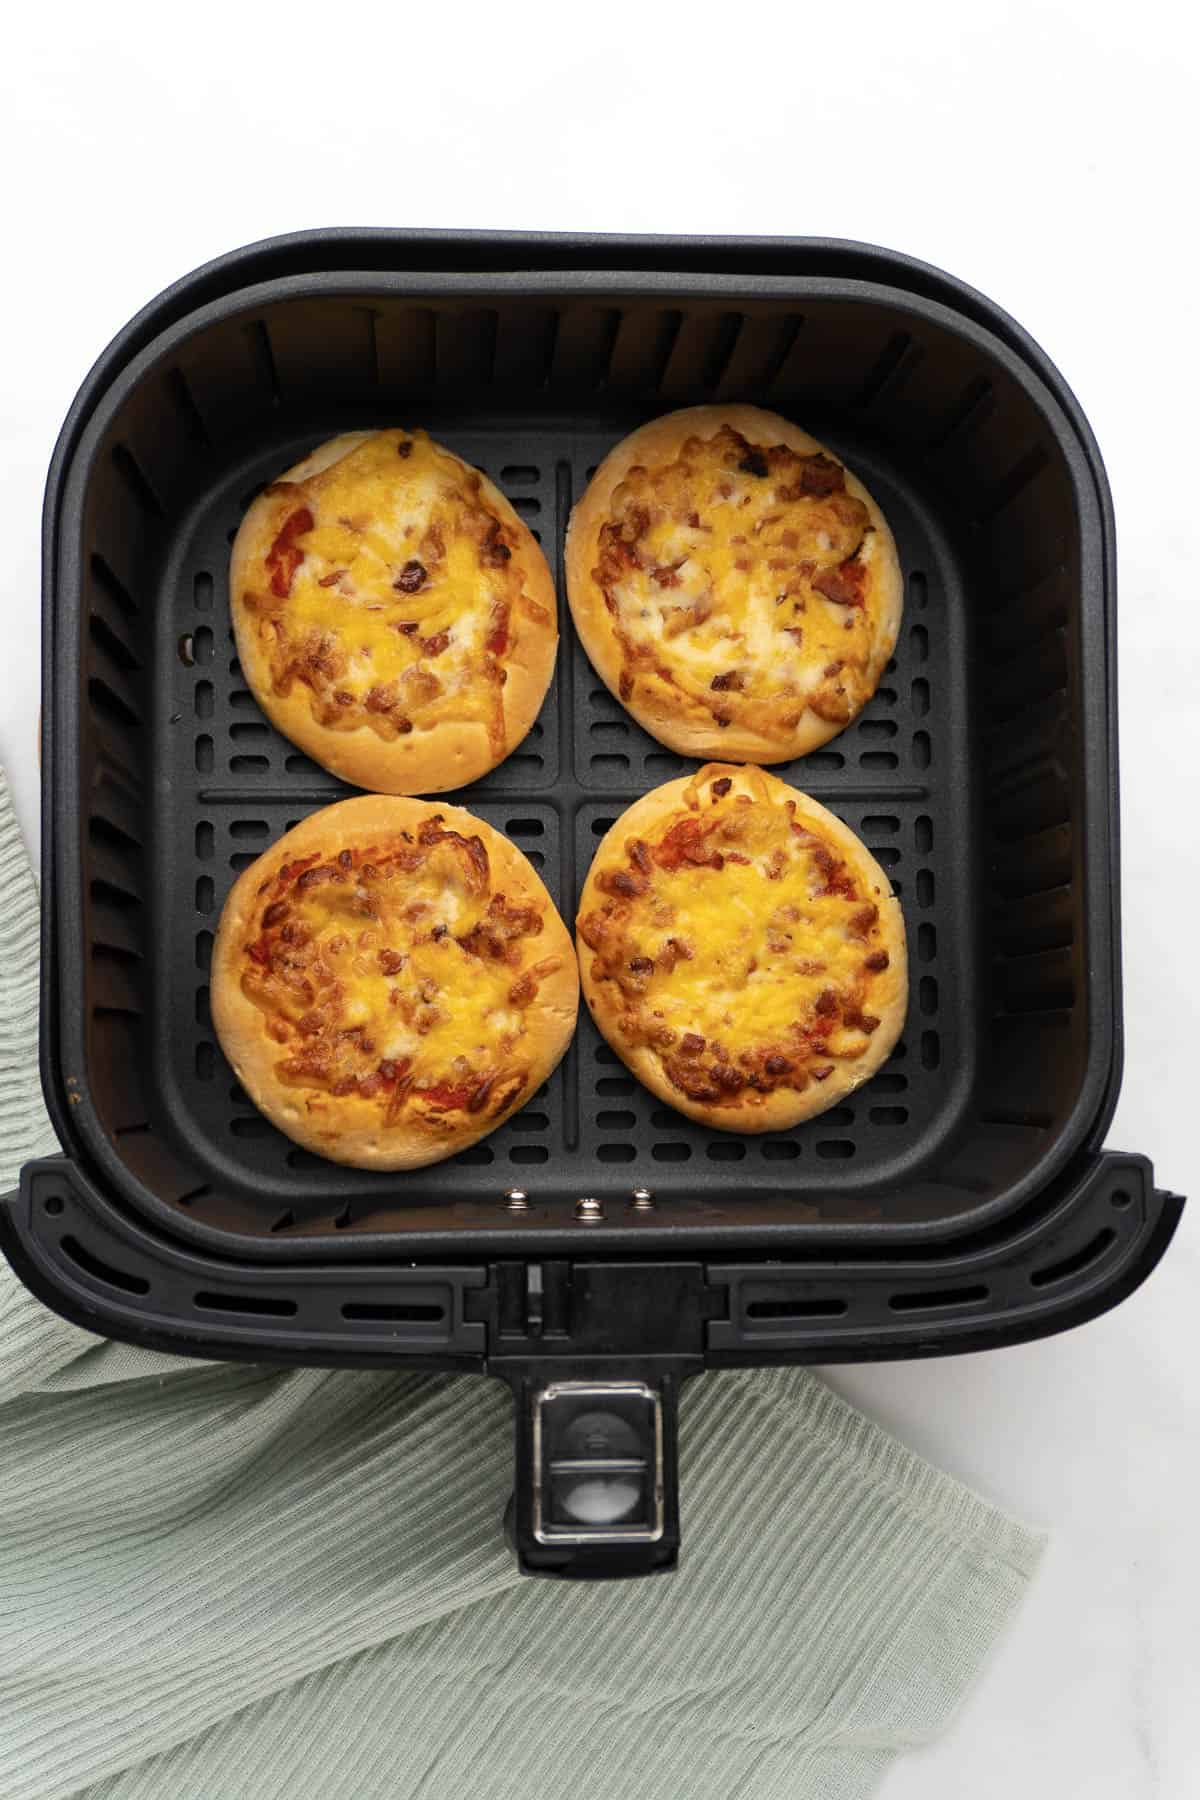 four mini pizzas in the air fryer after being cooked